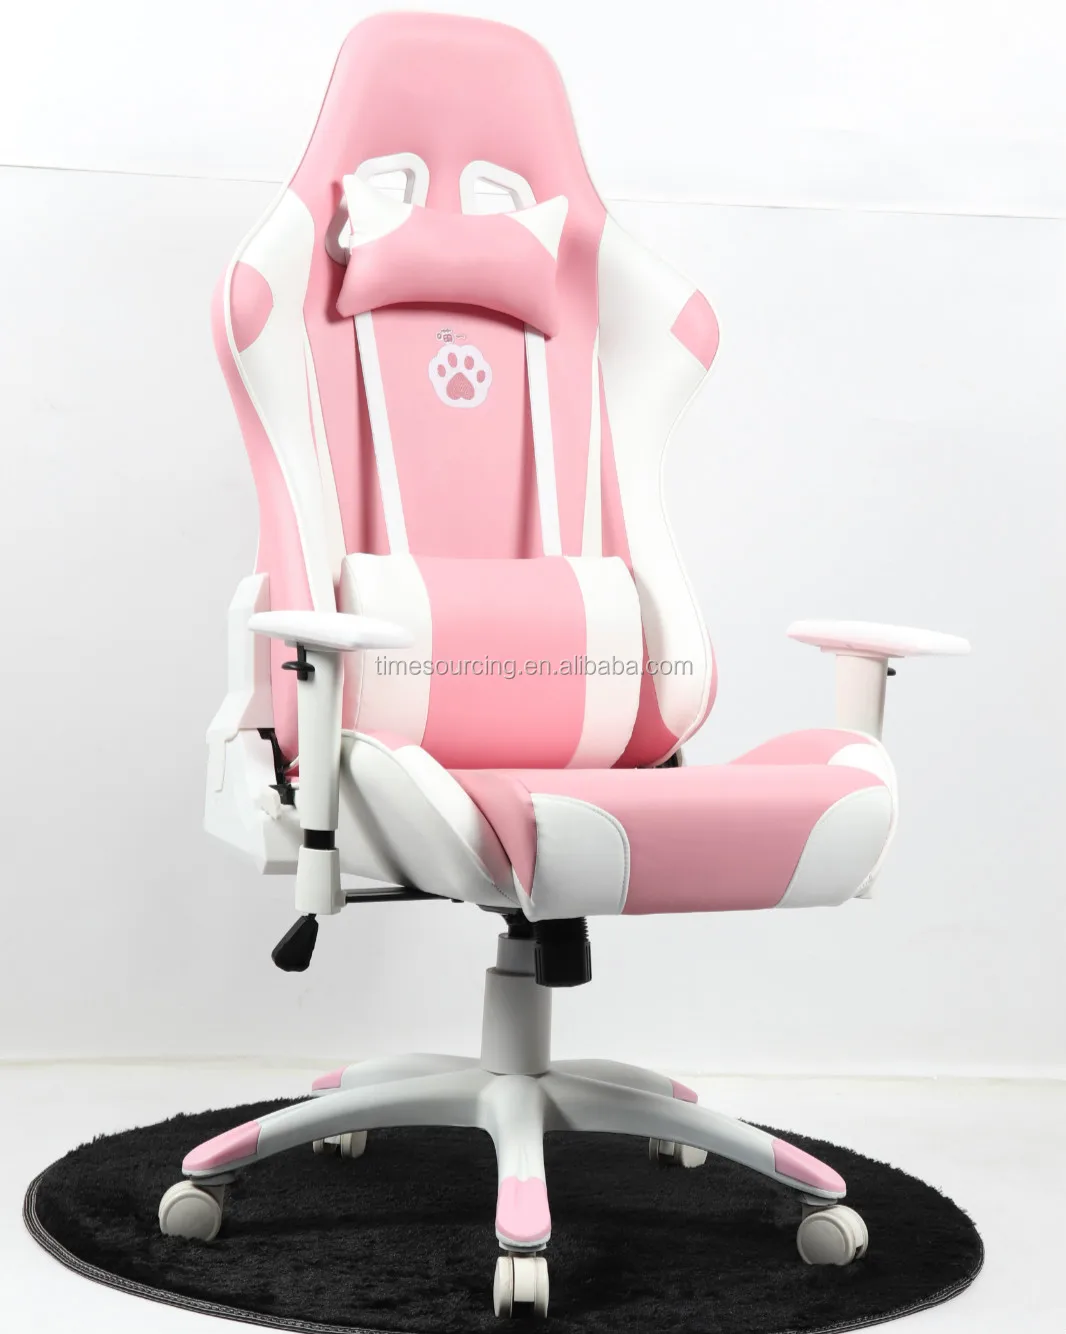 Wholesale Scorpion Pink And White Leather Adjustable Back Rocker Gaming Chair Buy Scorpion Gaming Chair Pink Gaming Chair Rocker Gaming Chair Product On Alibaba Com